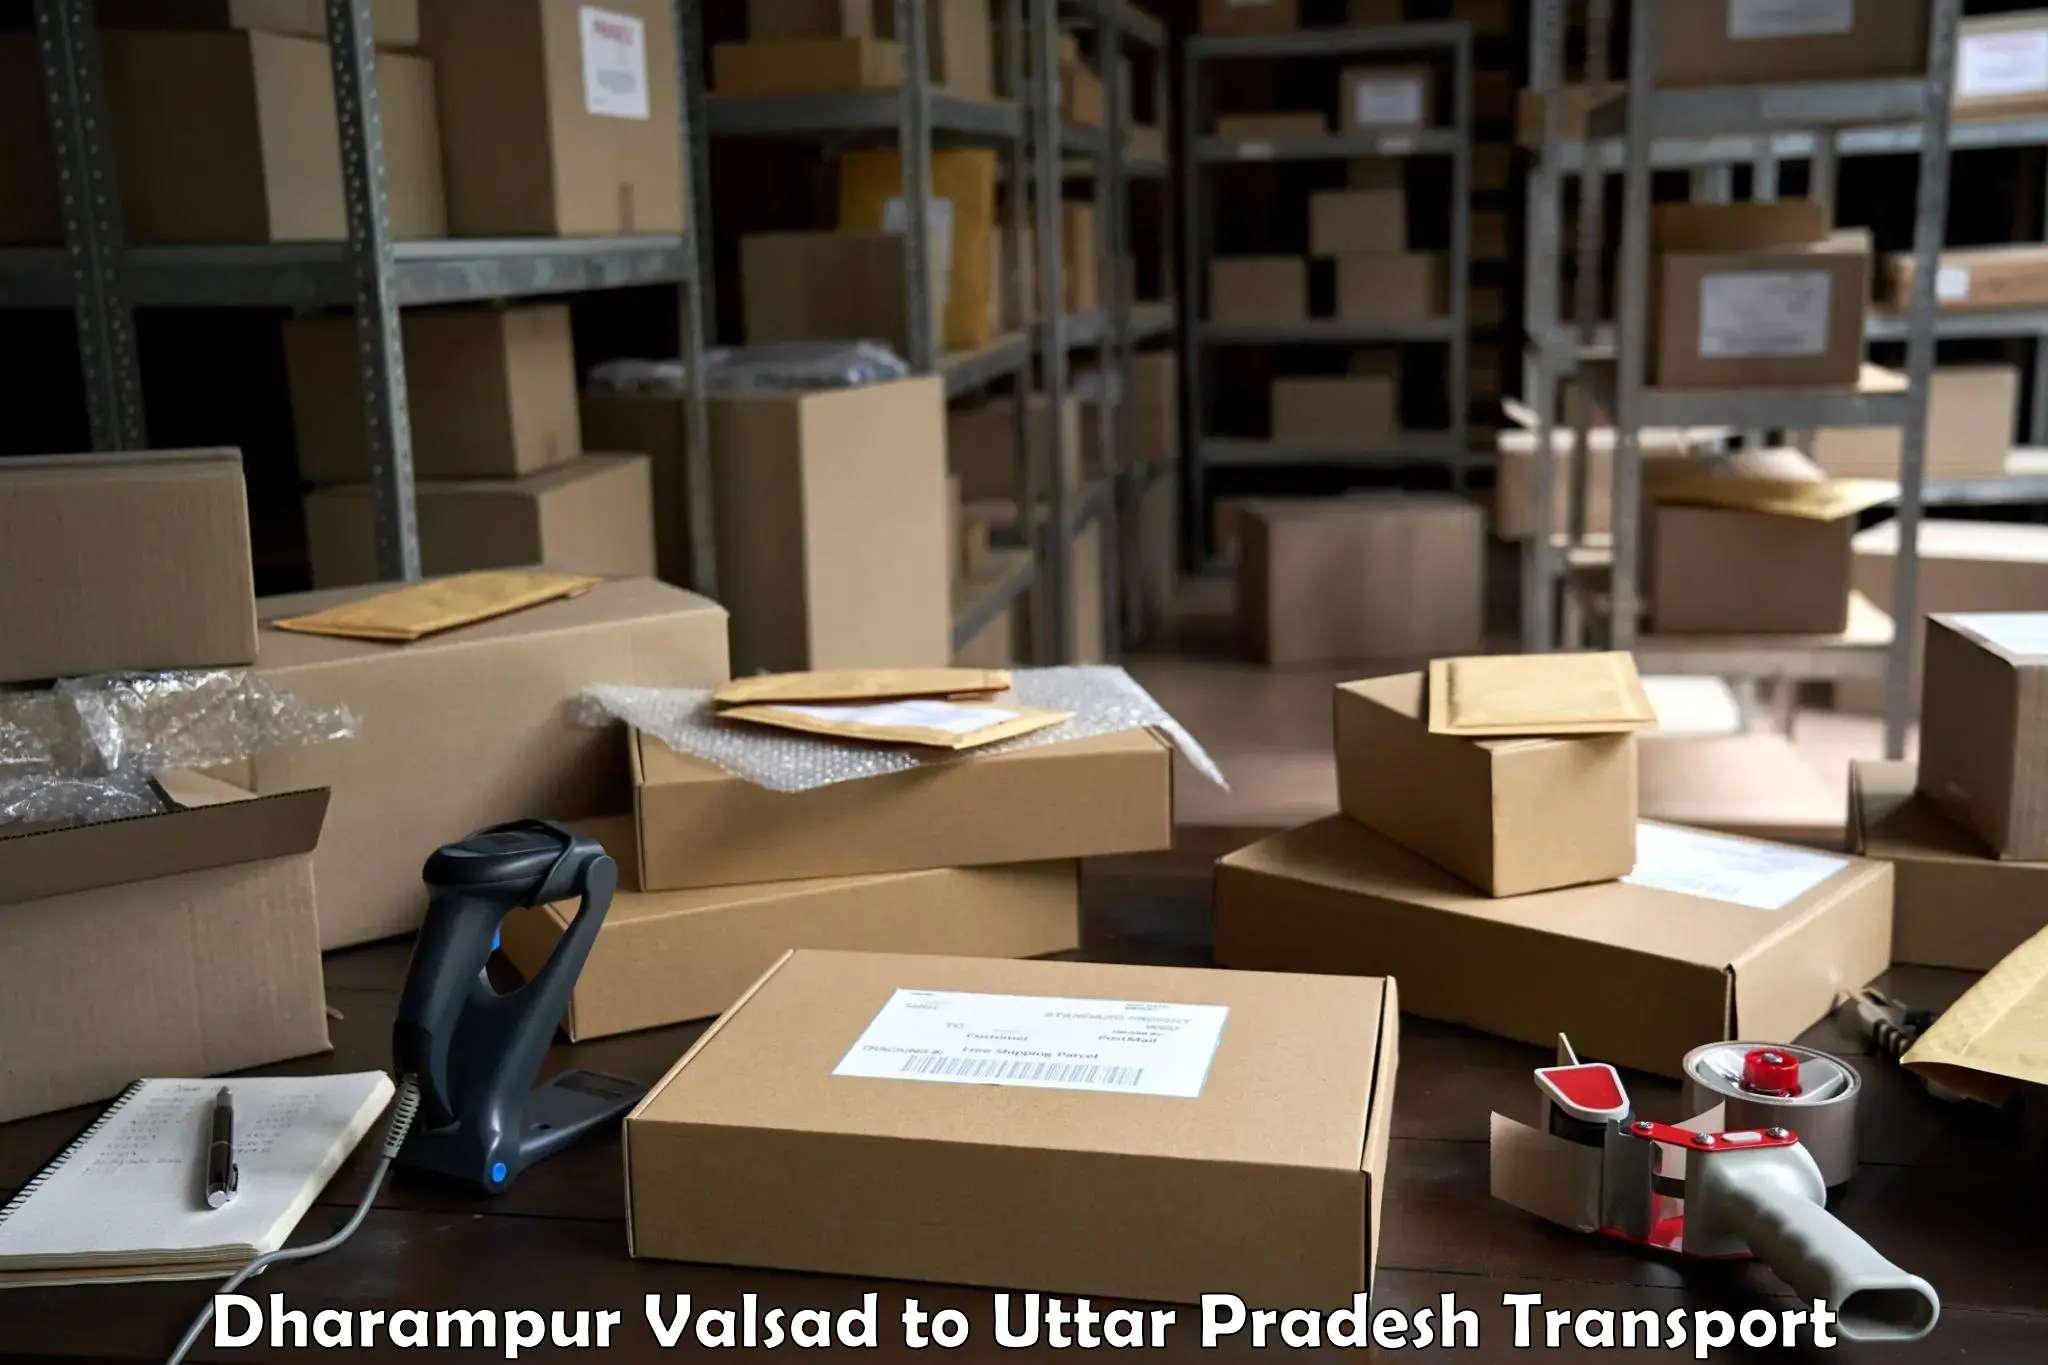 Luggage transport services Dharampur Valsad to Kanpur